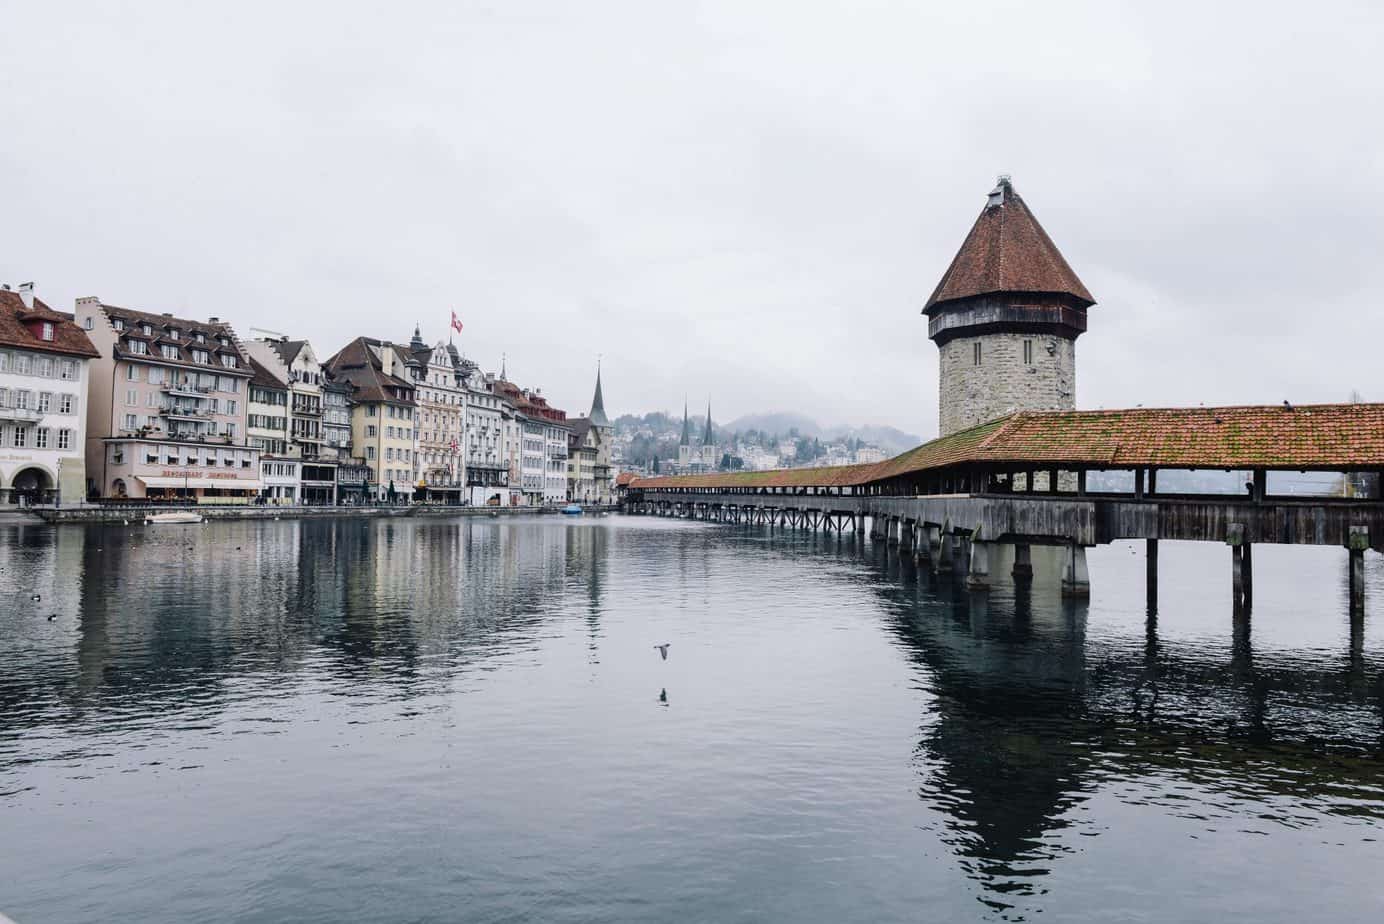 Switzerland on a grey day near the water with buildings on one side and a pier on the other